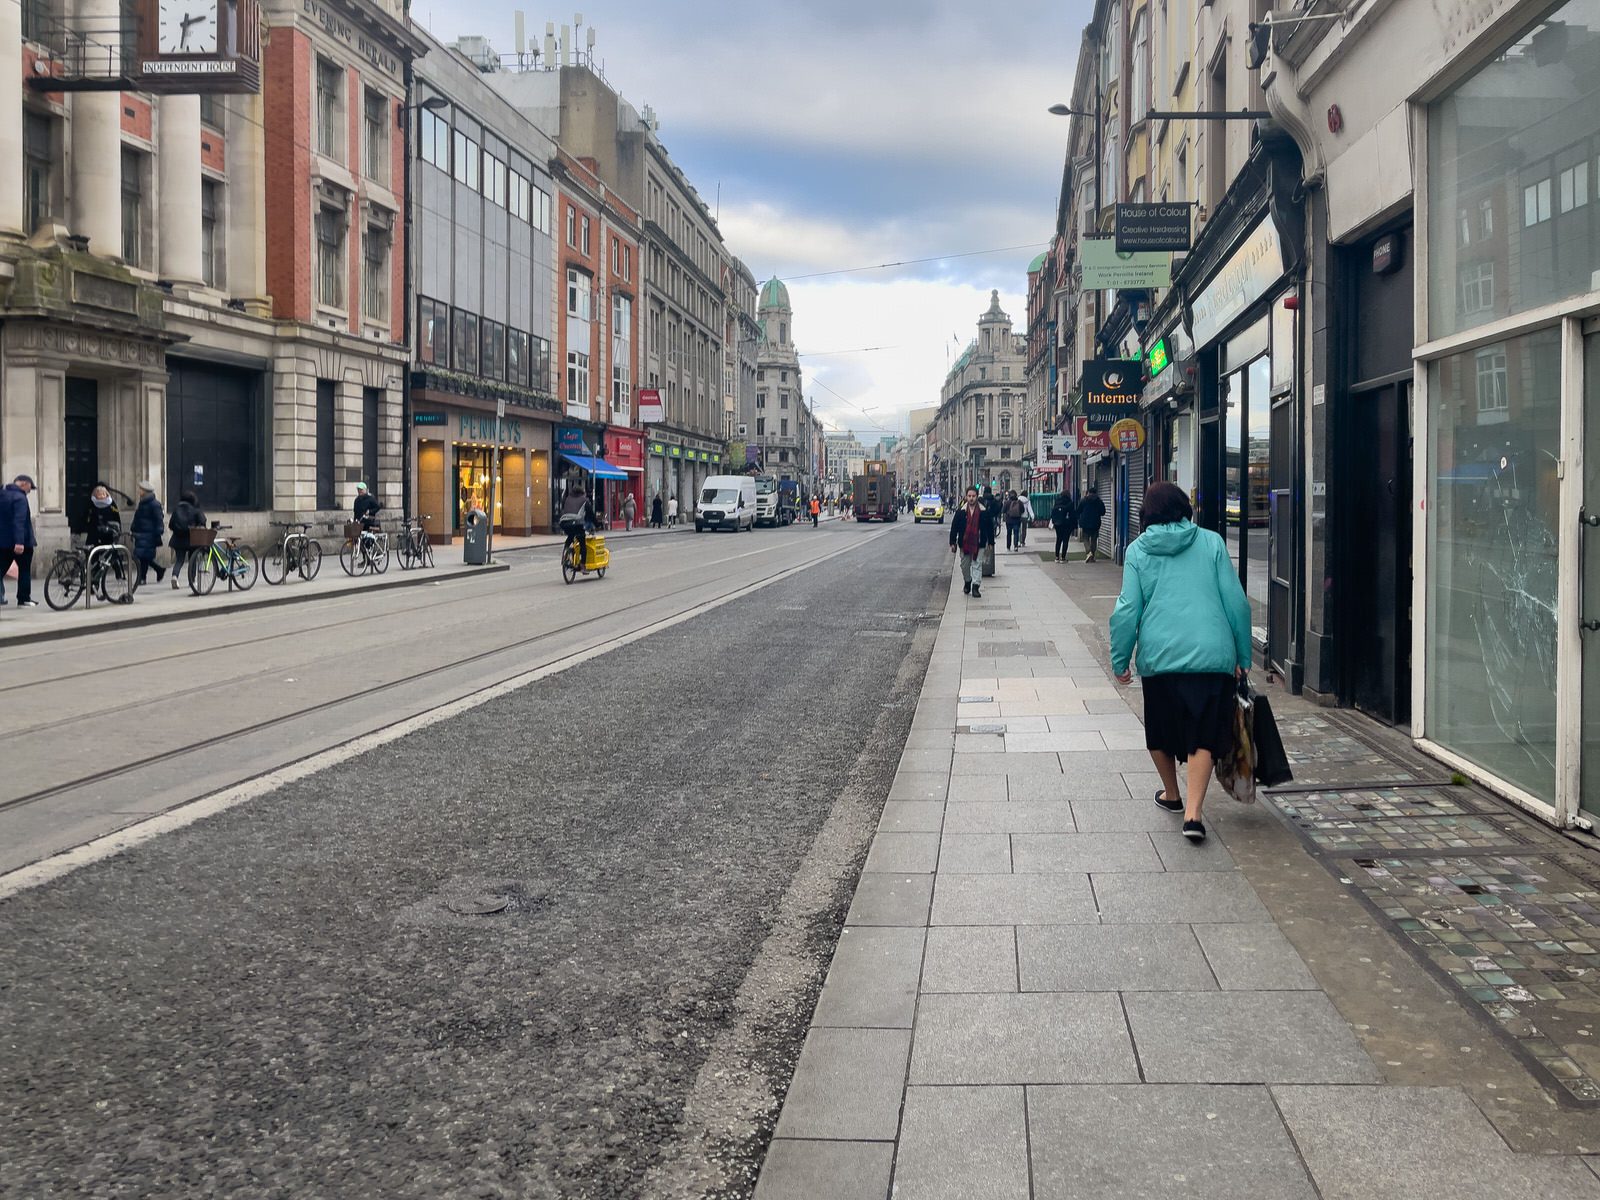 DUBLIN CITY CENTRE [THE DAY AFTER THE RIOT AND LITTLE TO SEE]-225286-1